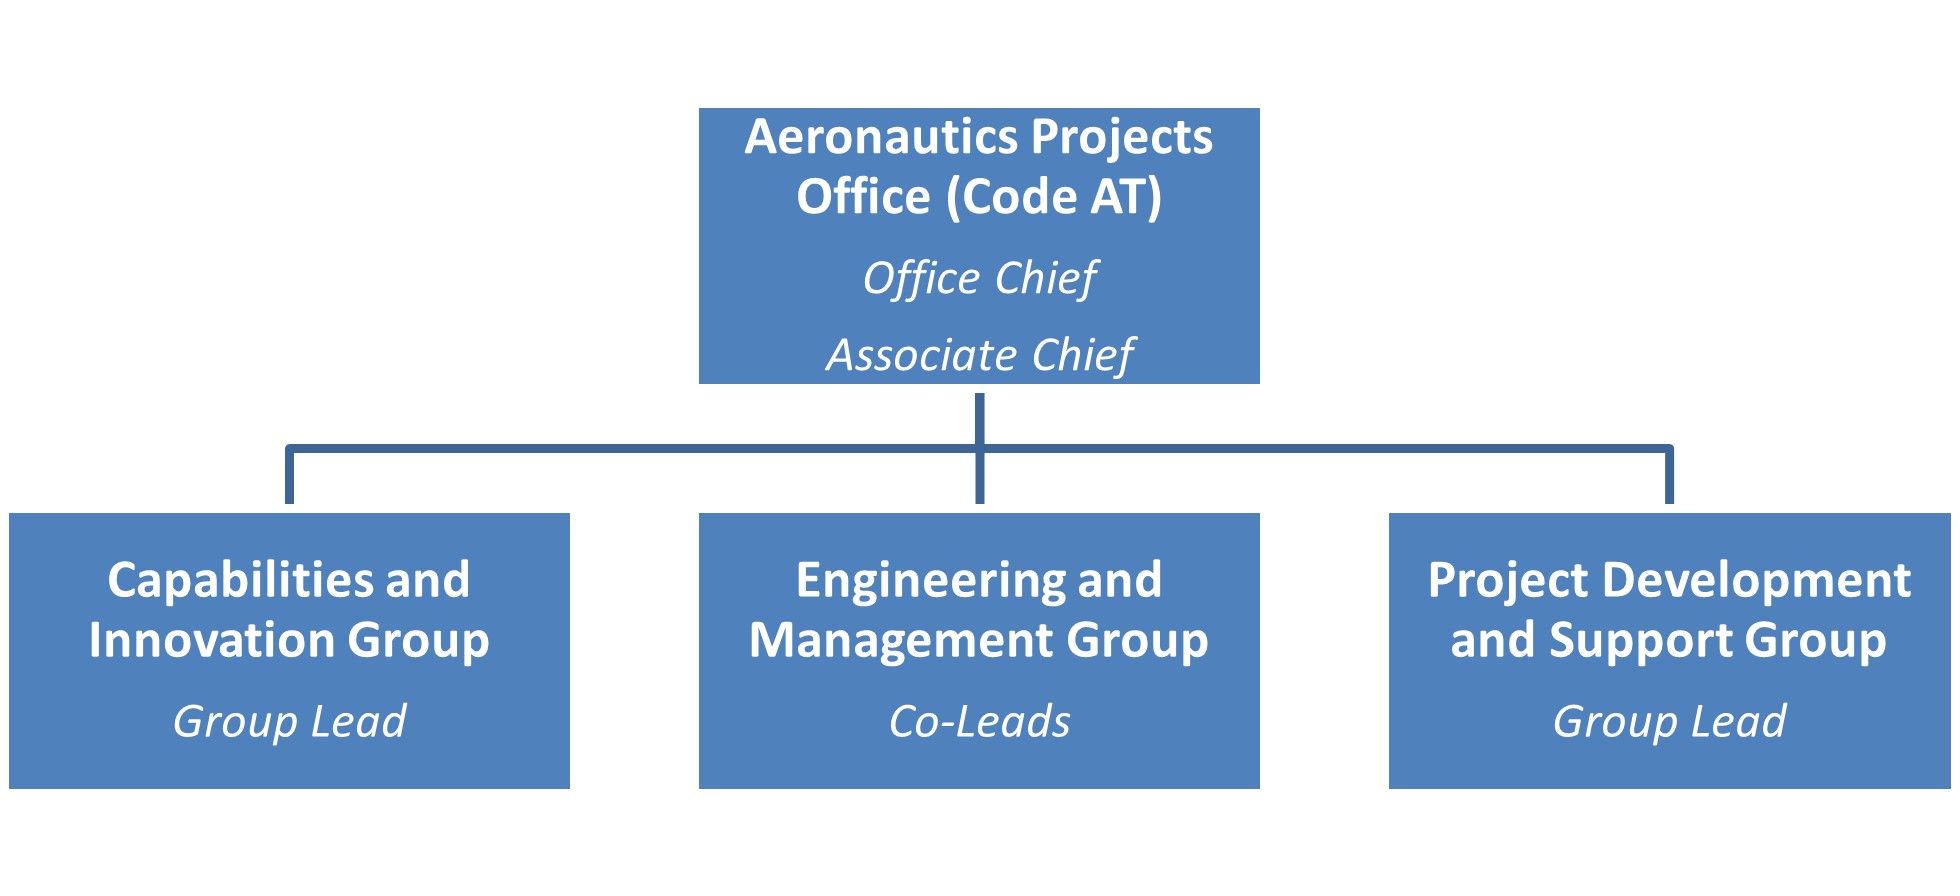 Organizational chart for the Aeronautics Projects Office displaying the structure of management and capabilities, engineering, and project development groups.